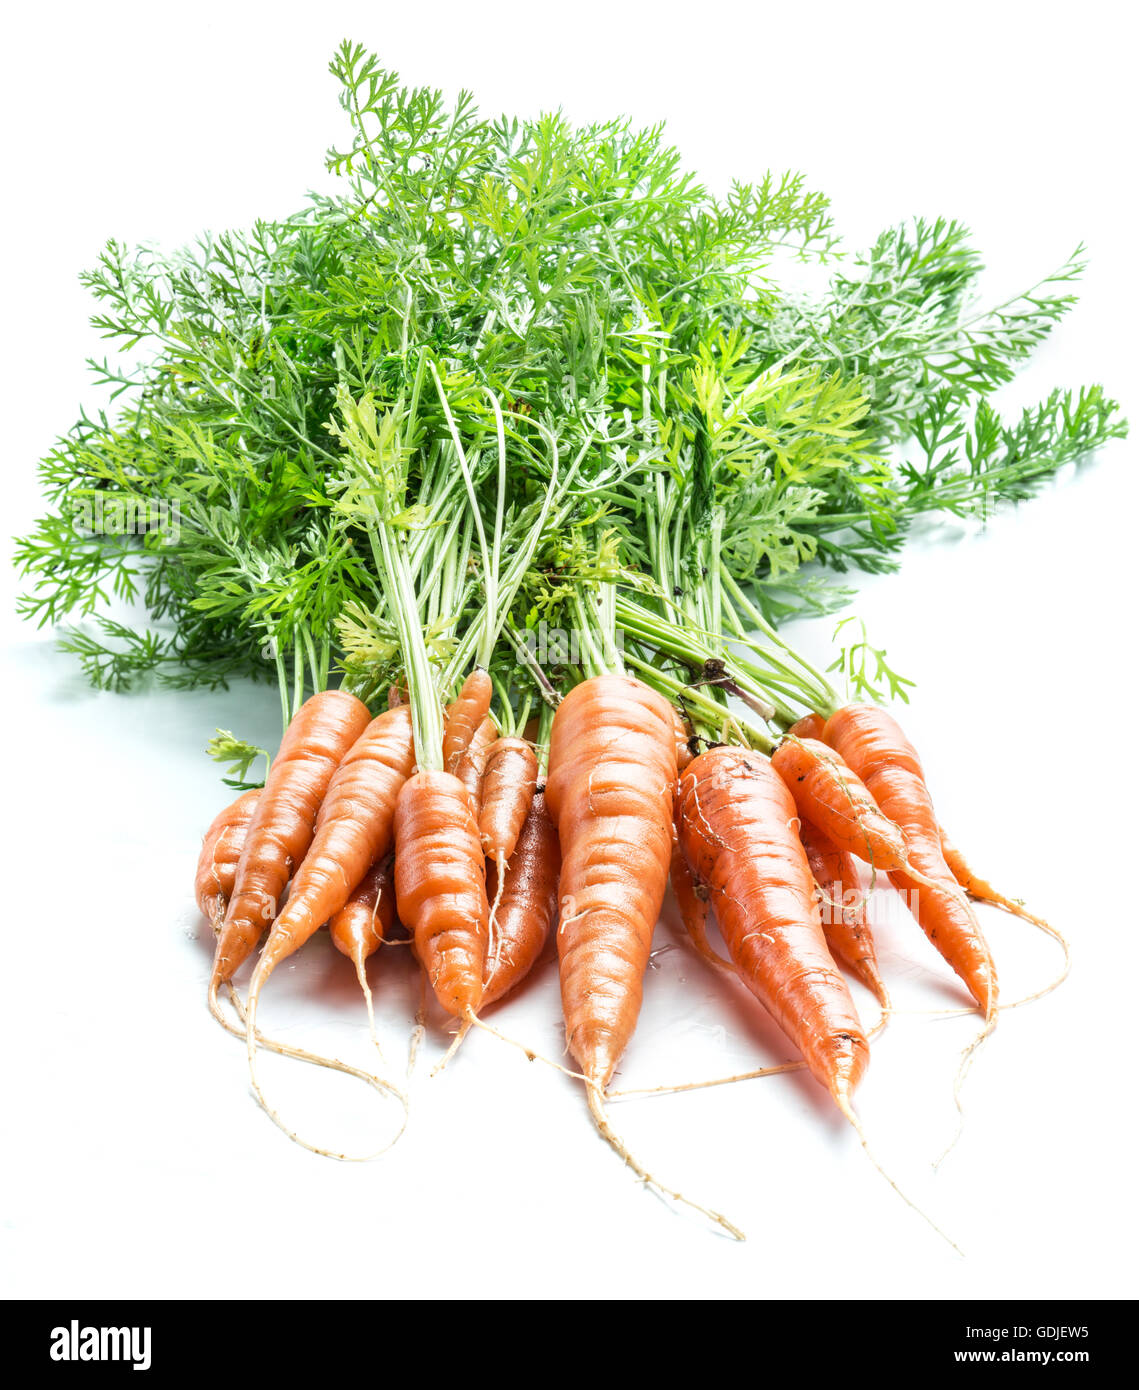 Carrots with greens on the white background. Stock Photo